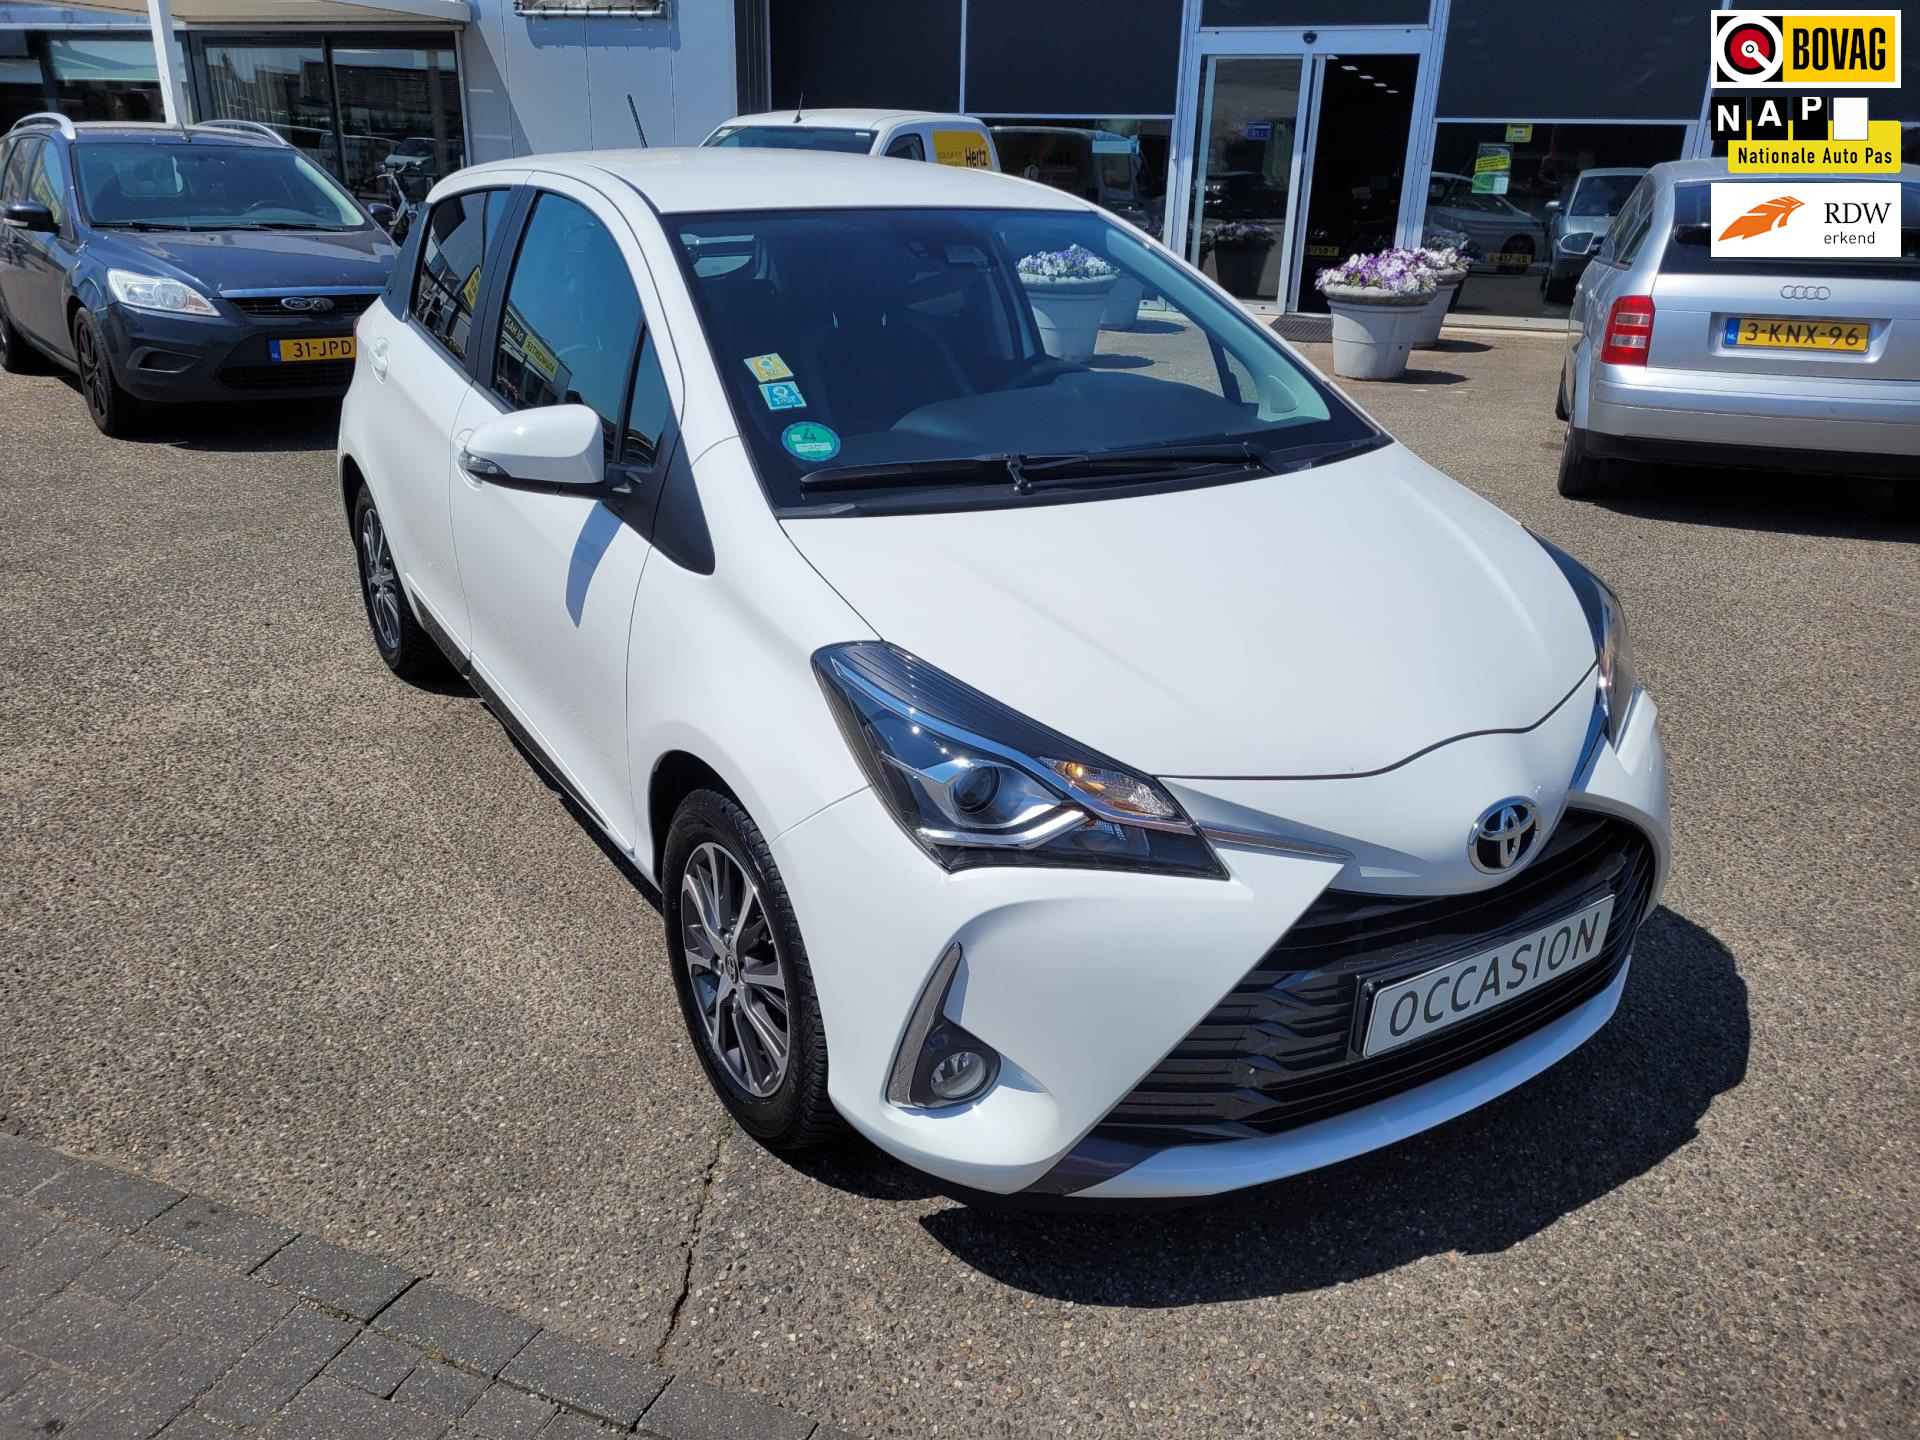 Toyota Yaris 1.5 VVT-i Dynamic Y20 AUTOMAAT / APPLE+ANDROID CAR PLAY / BTW Auto - 1/30